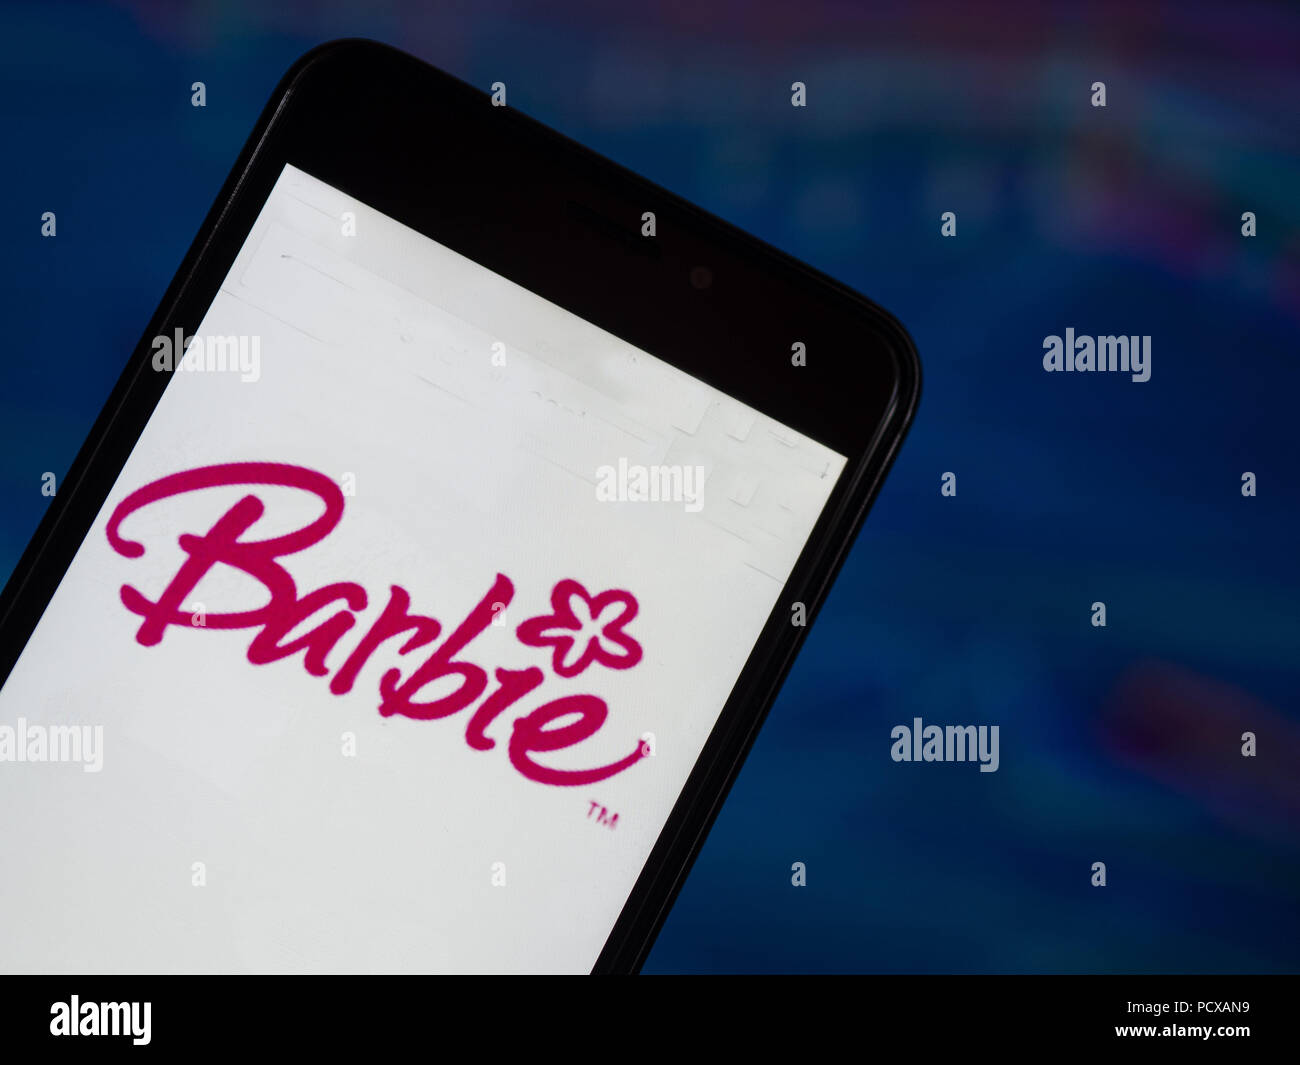 Barbie Logo High Resolution Stock Photography and Images - Alamy